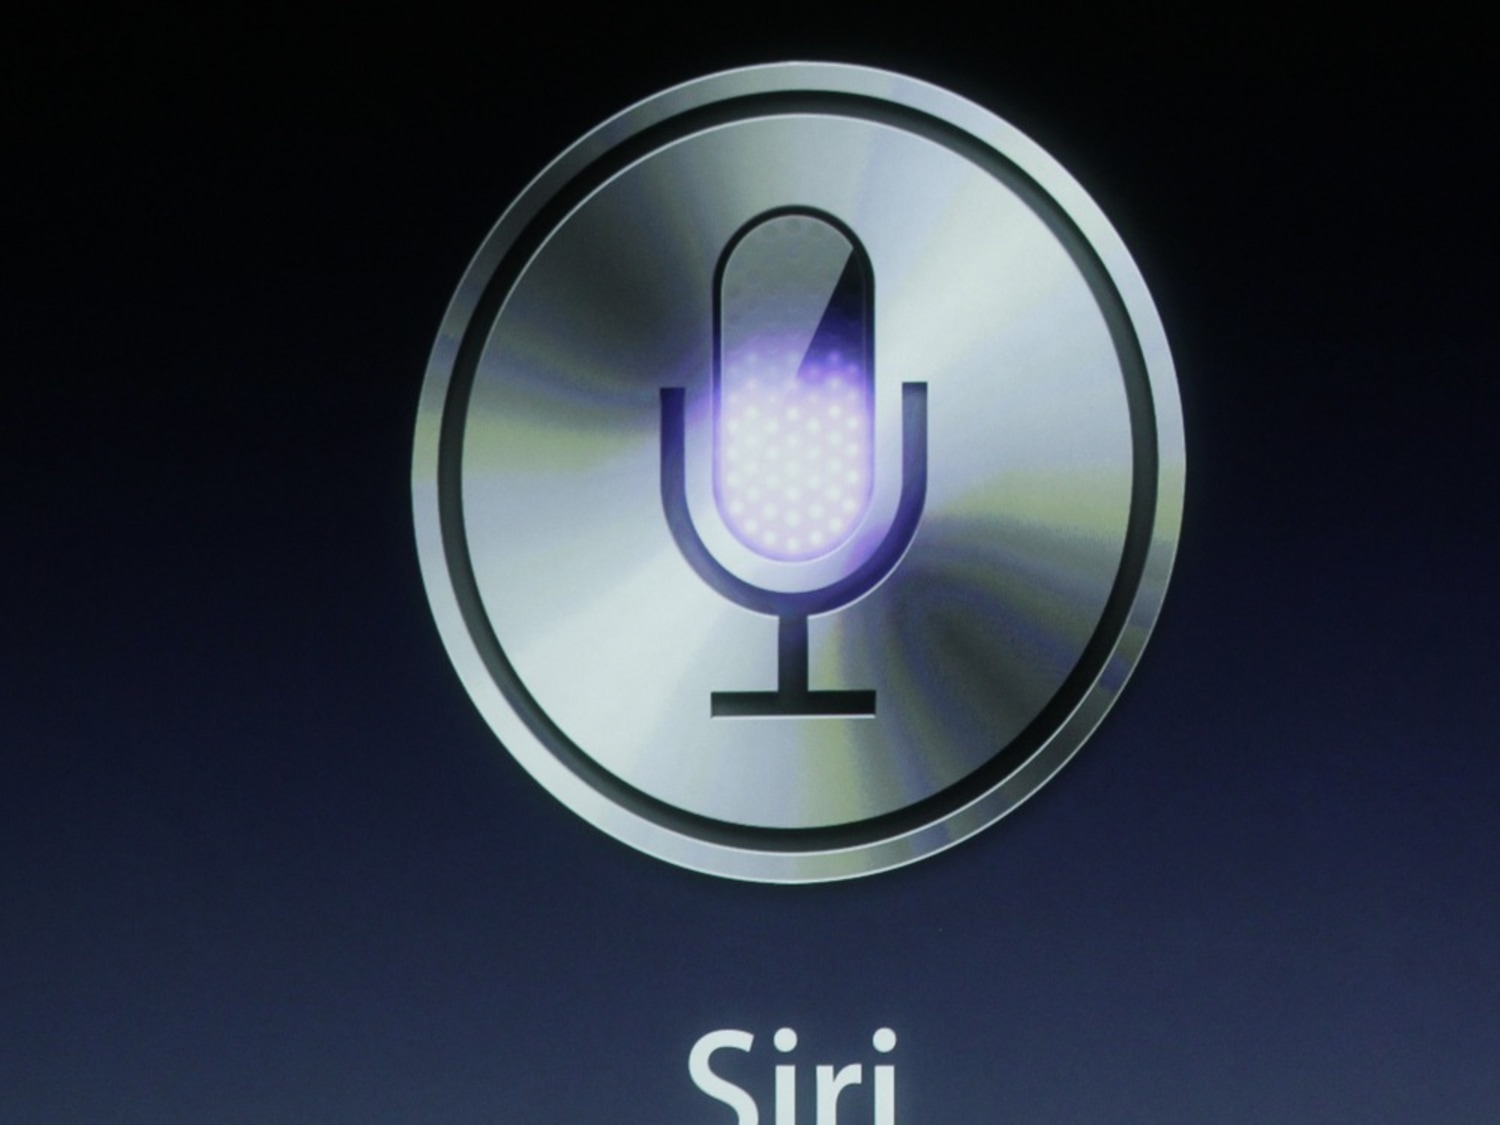 Apple's Next Change for Siri: Dropping the 'Hey' in 'Hey Siri' Trigger  Phrase - Bloomberg